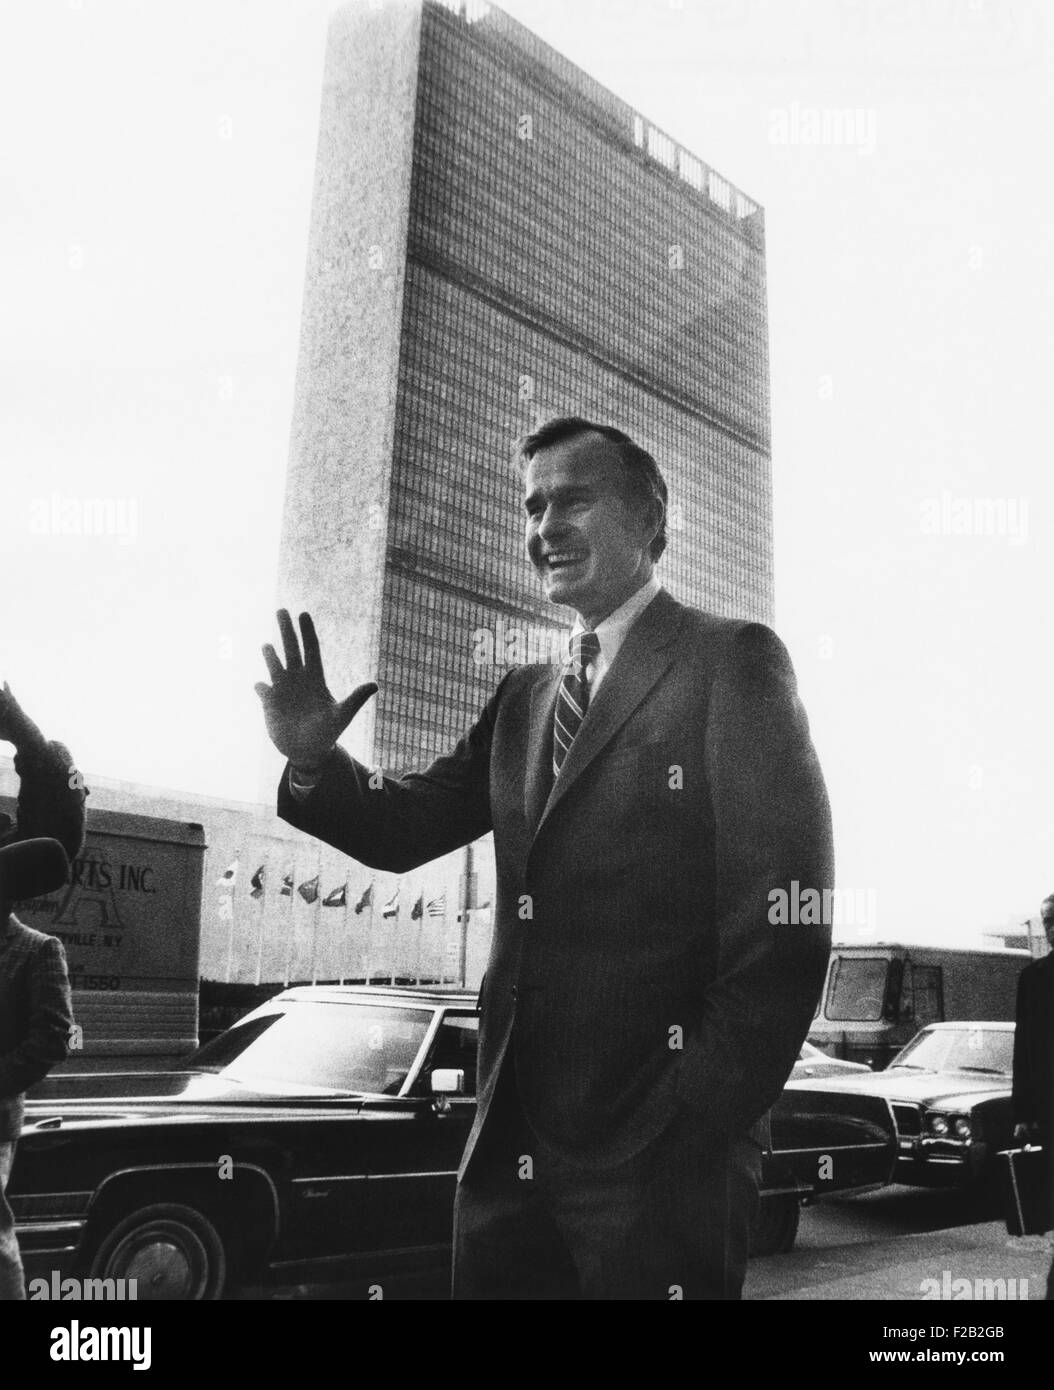 U.S. Ambassador George Bush before his last official appearance at the UN on Jan. 16, 1973. President Nixon named him Chairman of the Republican National Committee. He would serve during the Watergate Scandal and Nixon's Resignation in 1974. (CSU 2015 7 349) Stock Photo